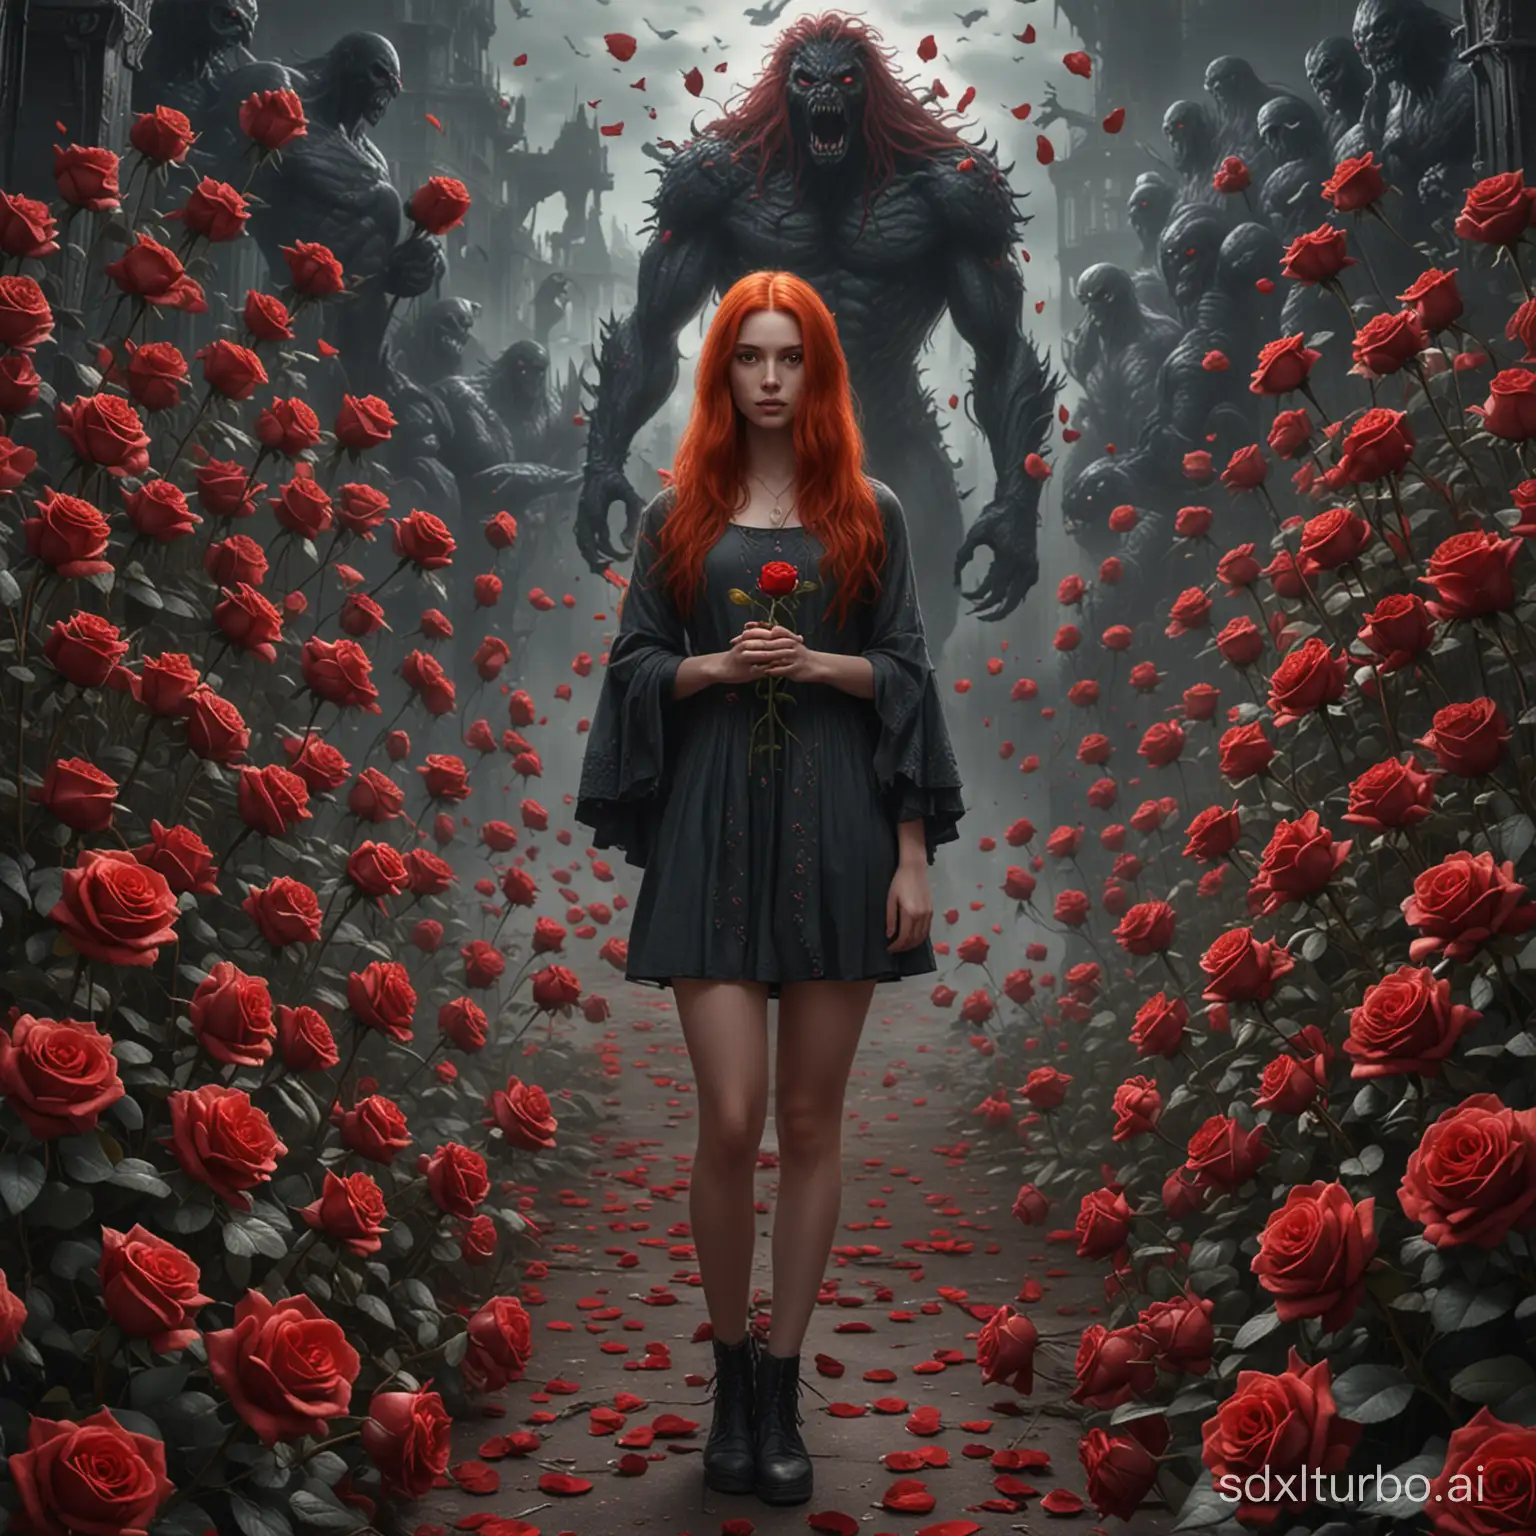 RedHaired-Girl-Holding-101-Roses-Surrounded-by-Realistic-Monsters